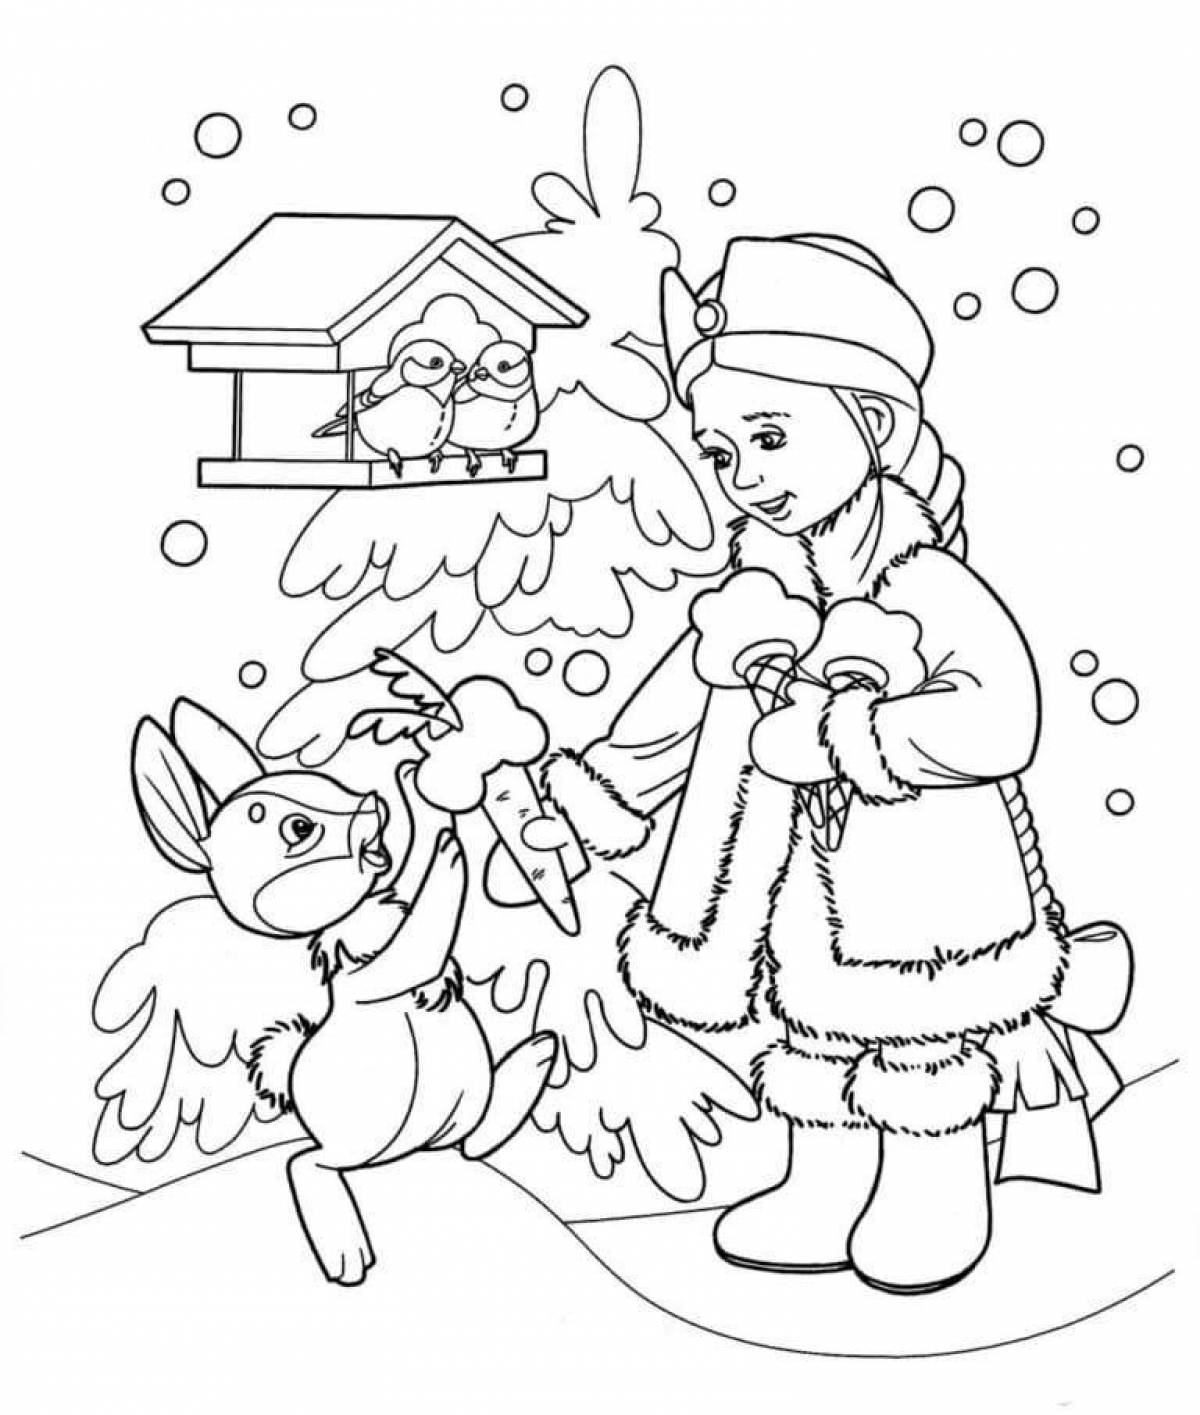 Adorable snow maiden coloring book for kids